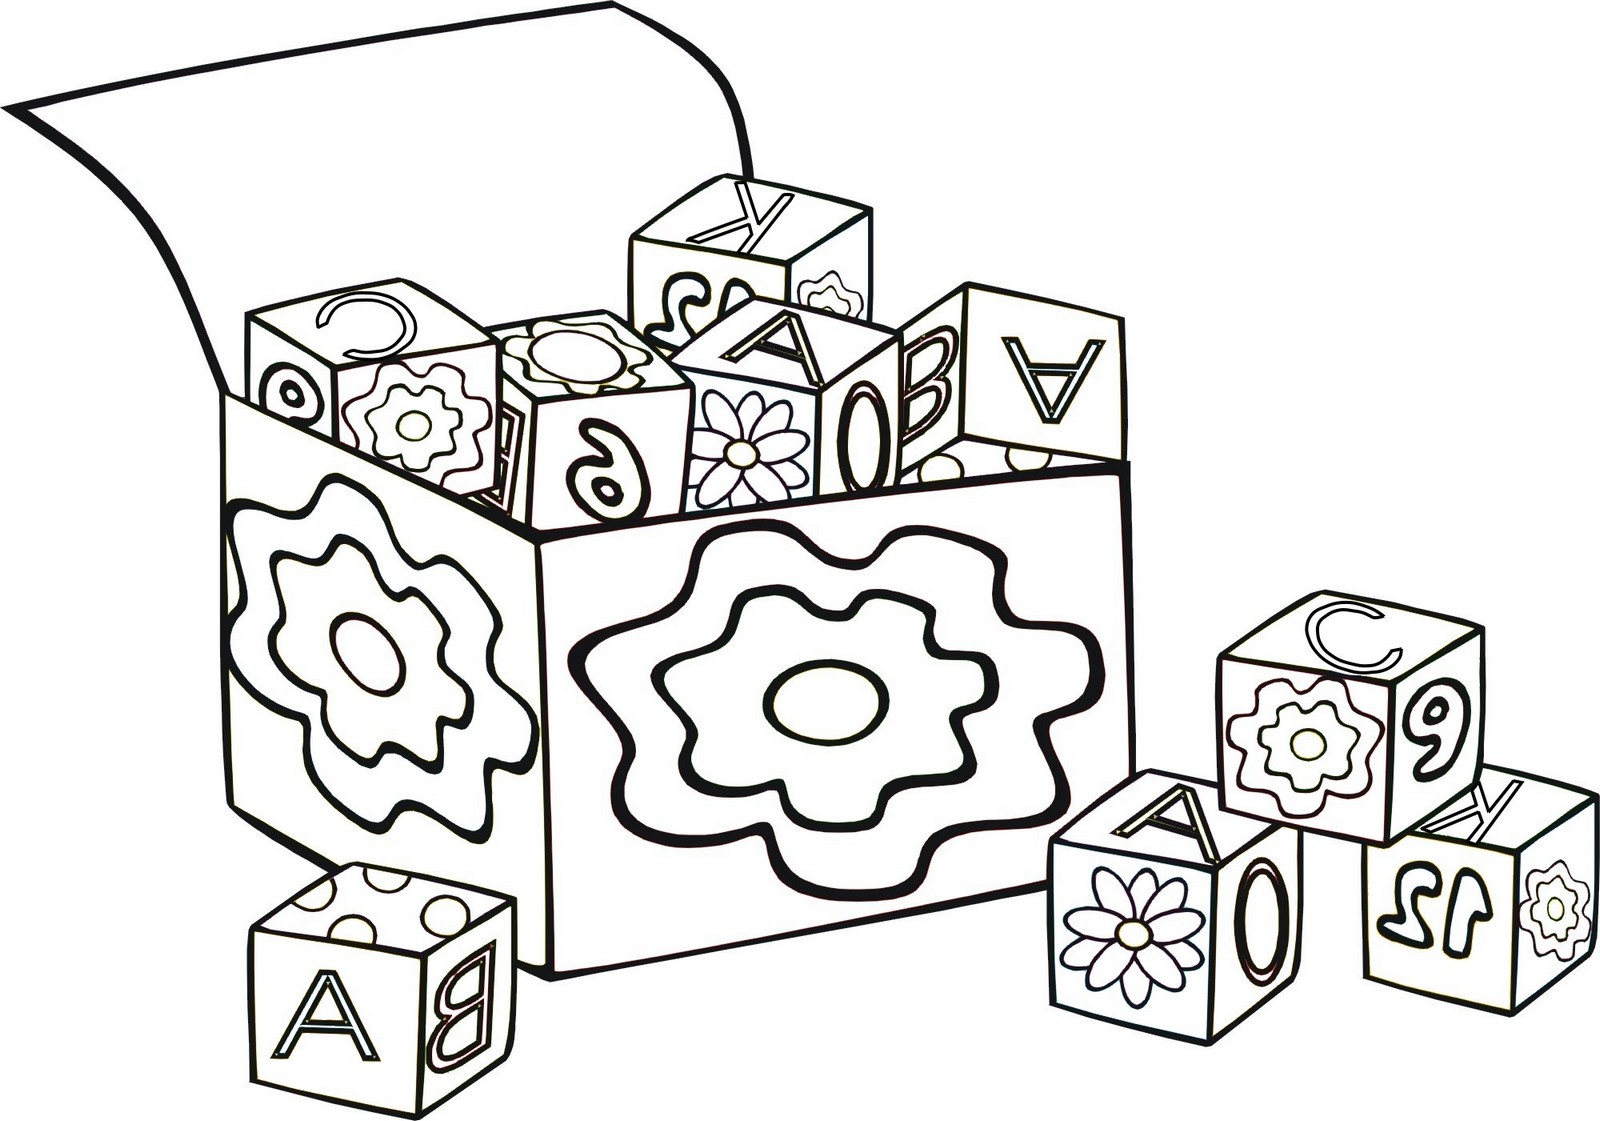 10 Fun and Simple Blocks Coloring Pages for Preschool - Coloring Pages